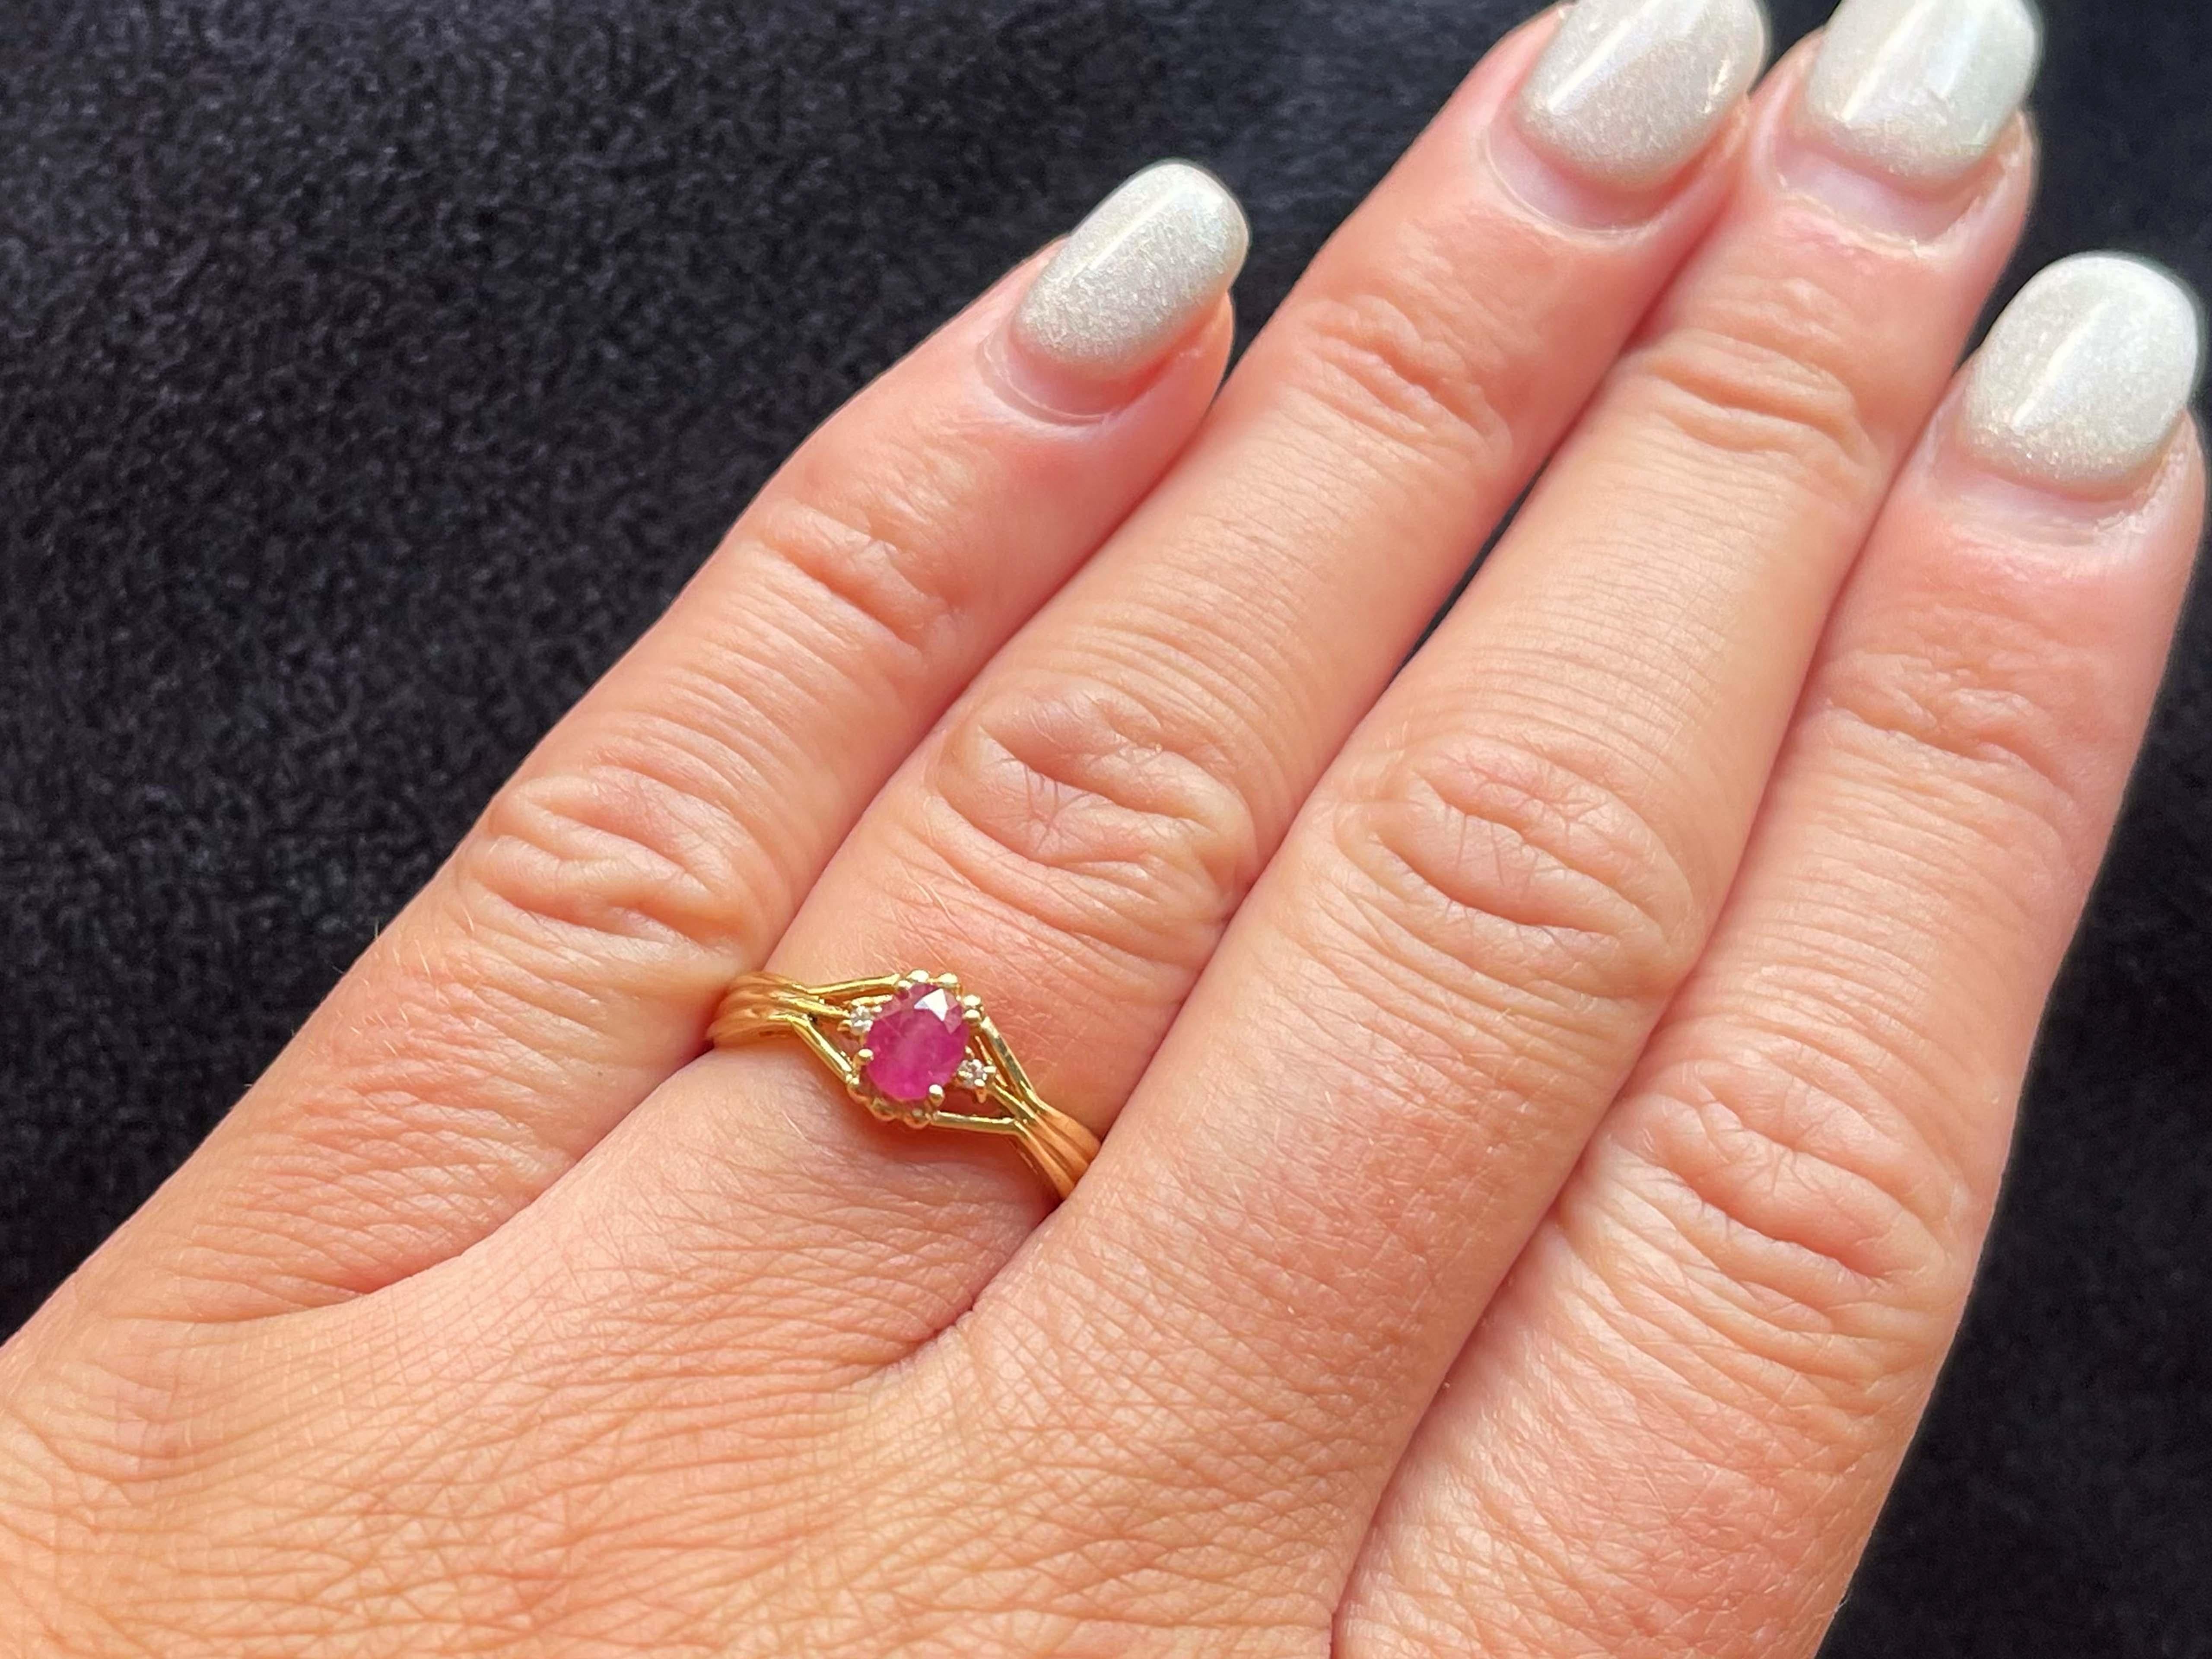 Item Specifications:

Metal: 14K Yellow Gold

Style: Statement Ring

Ring Size: 6.25 (resizing available for a fee)

Total Weight: 2.0 Grams

Gemstone Specifications:

Gemstones: 1 oval red ruby

Ruby Carat Weight: 0.25 carats
​
​Ruby Measurements: